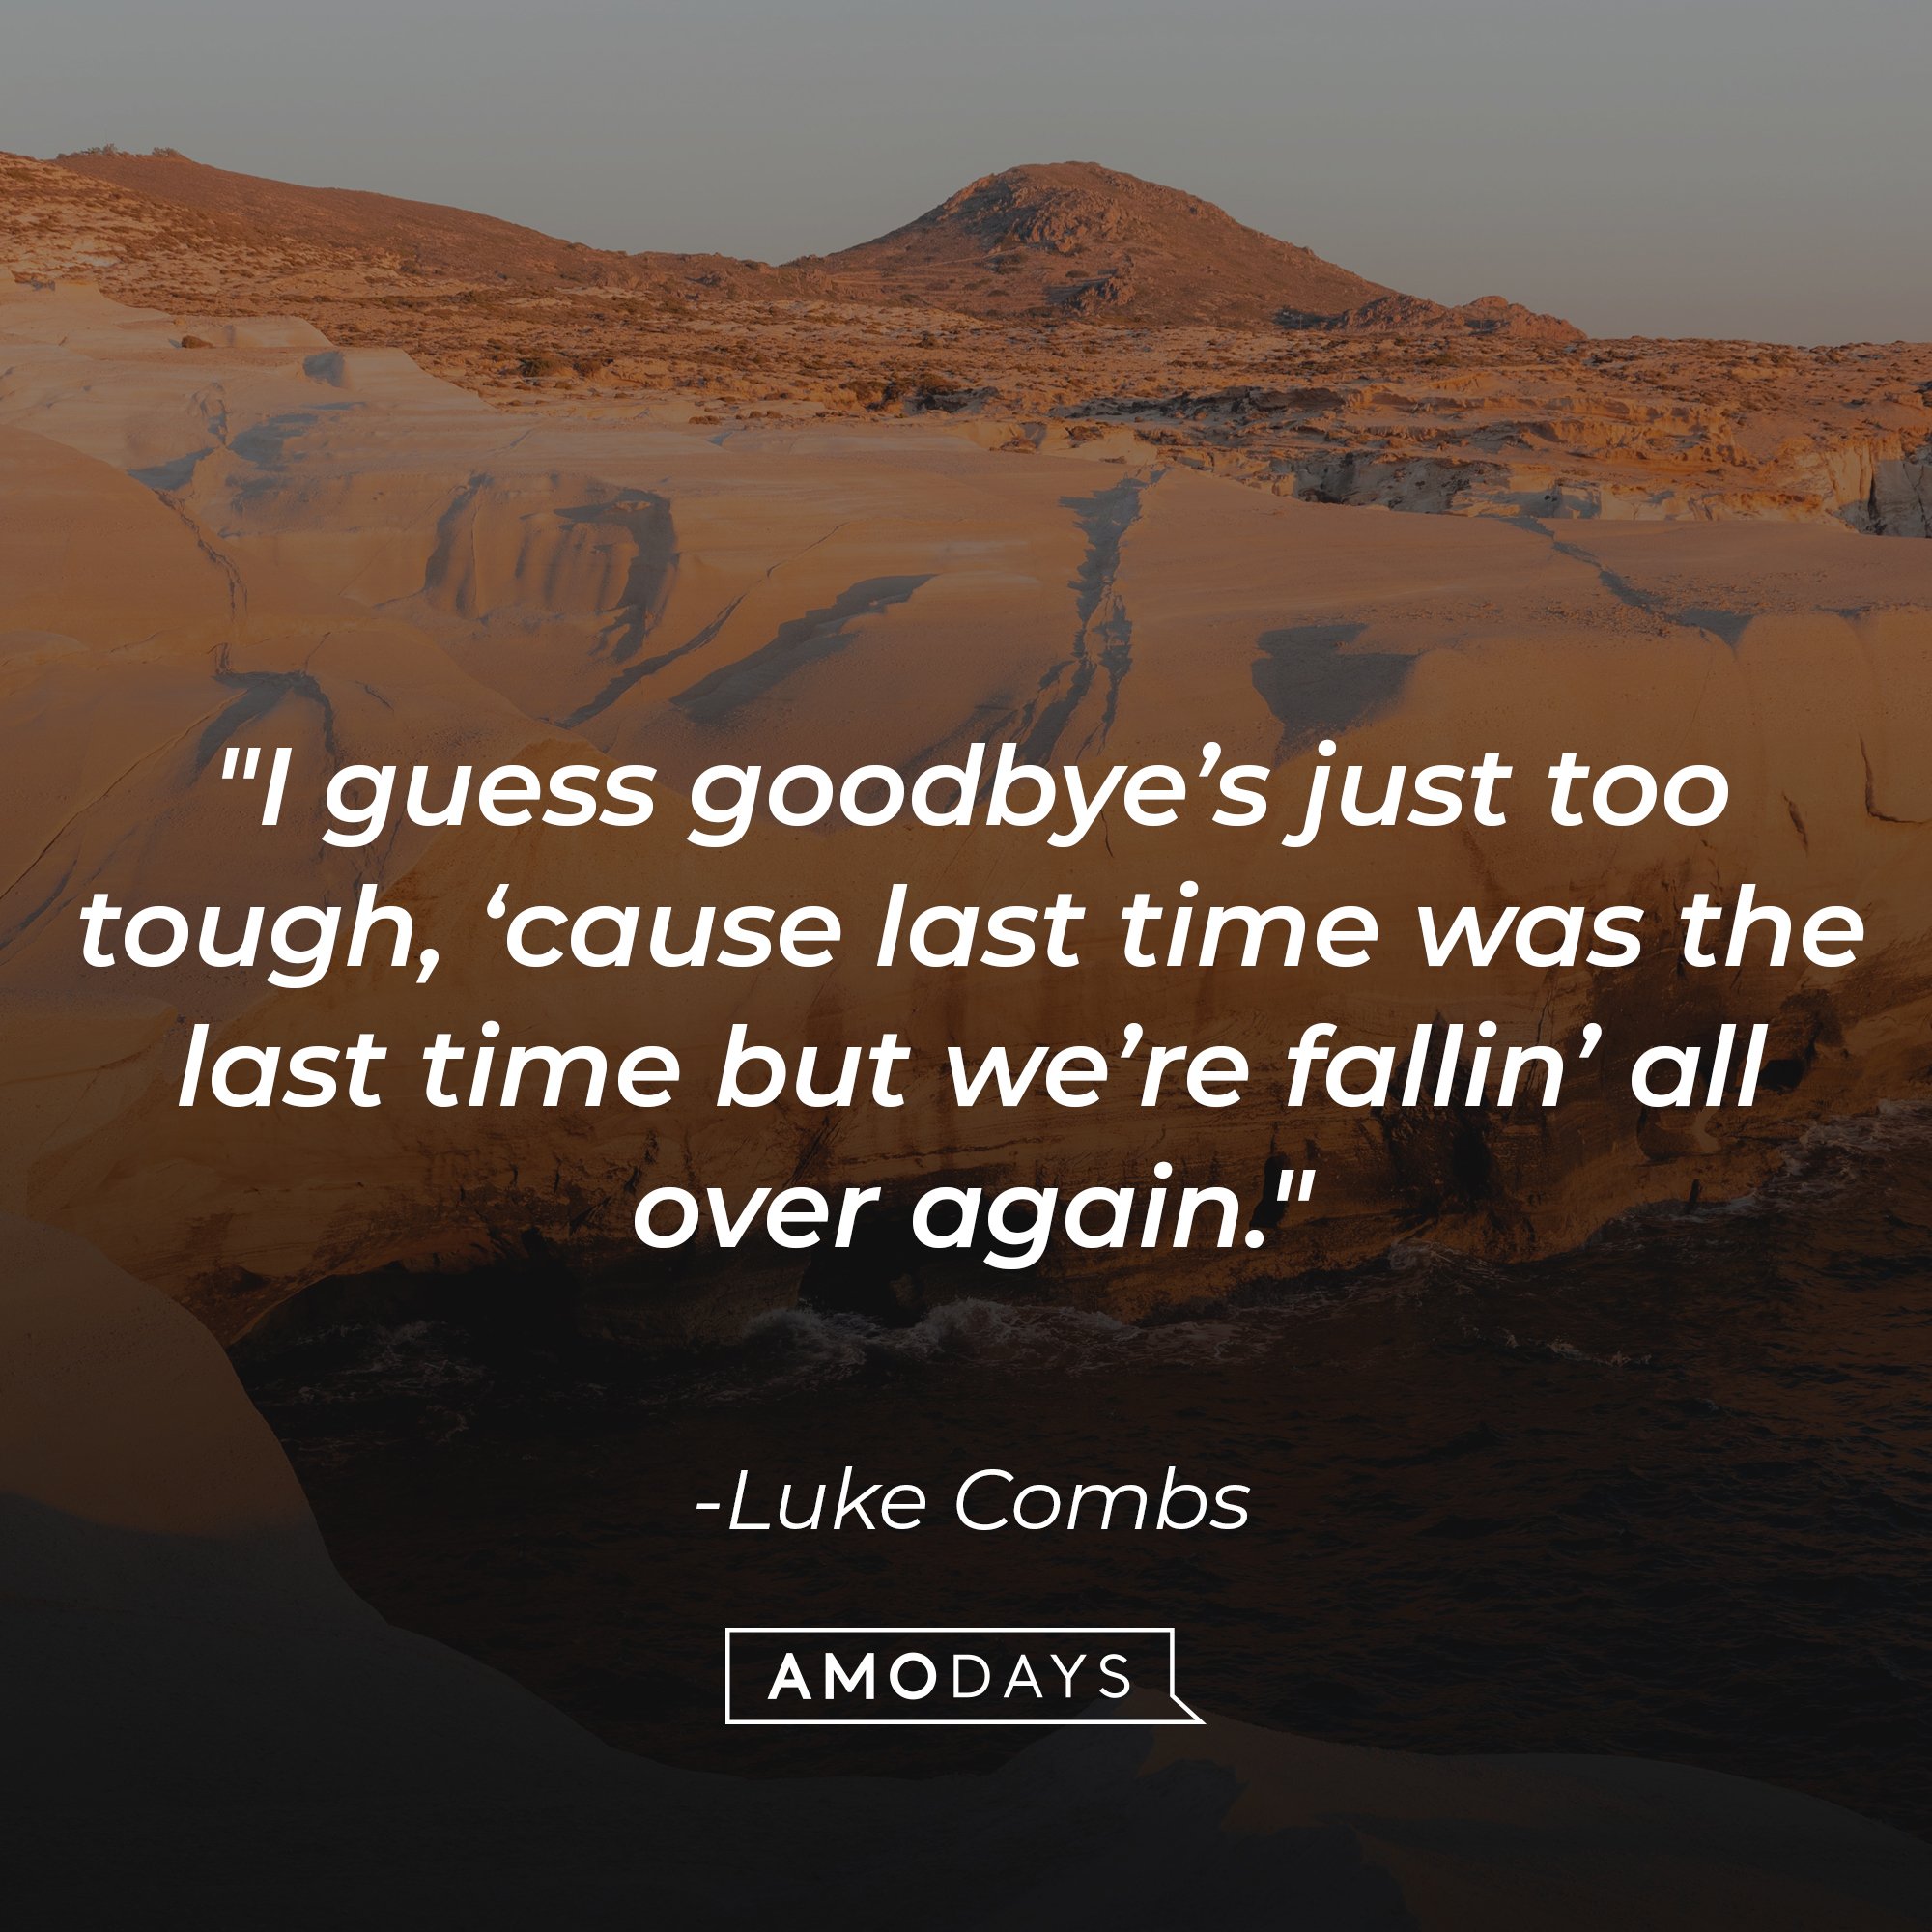 Luke Combs's quote "I guess goodbye’s just too tough, ‘cause last time was the last time but we’re fallin’ all over again." | Source: Unsplash.com